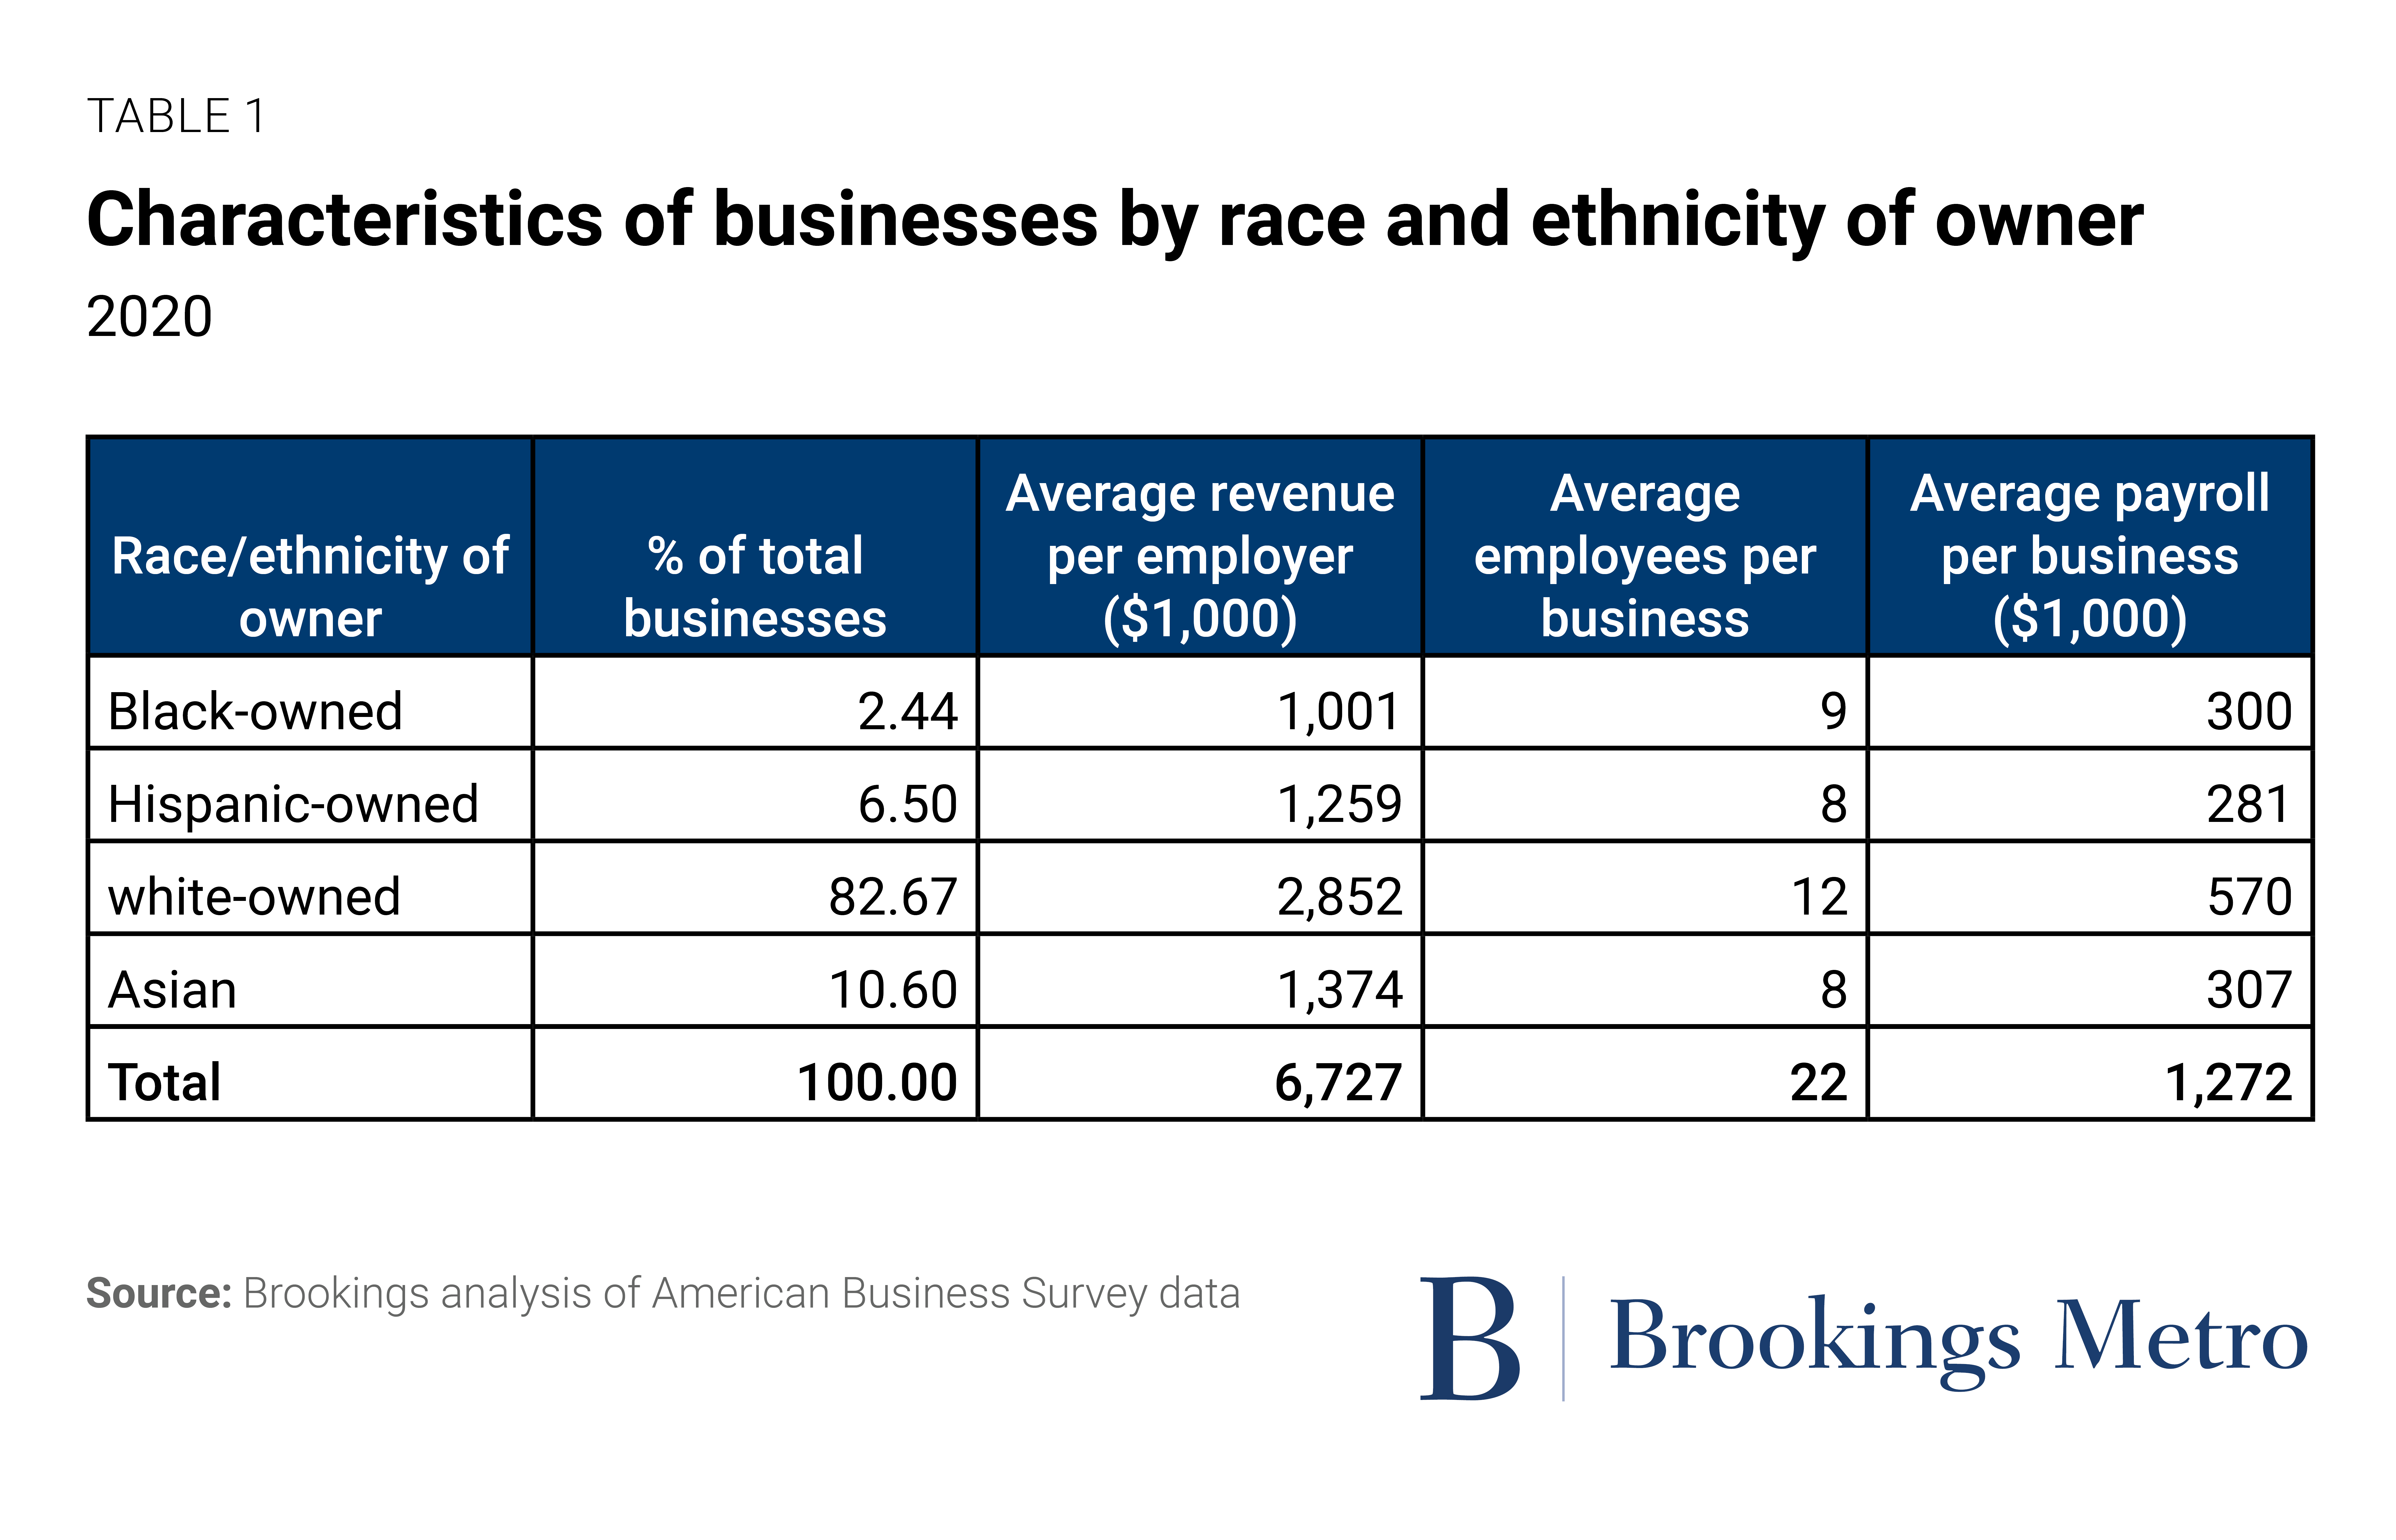 Table 1: Characteristics of businesses by race and ethnicity of owner in 2020